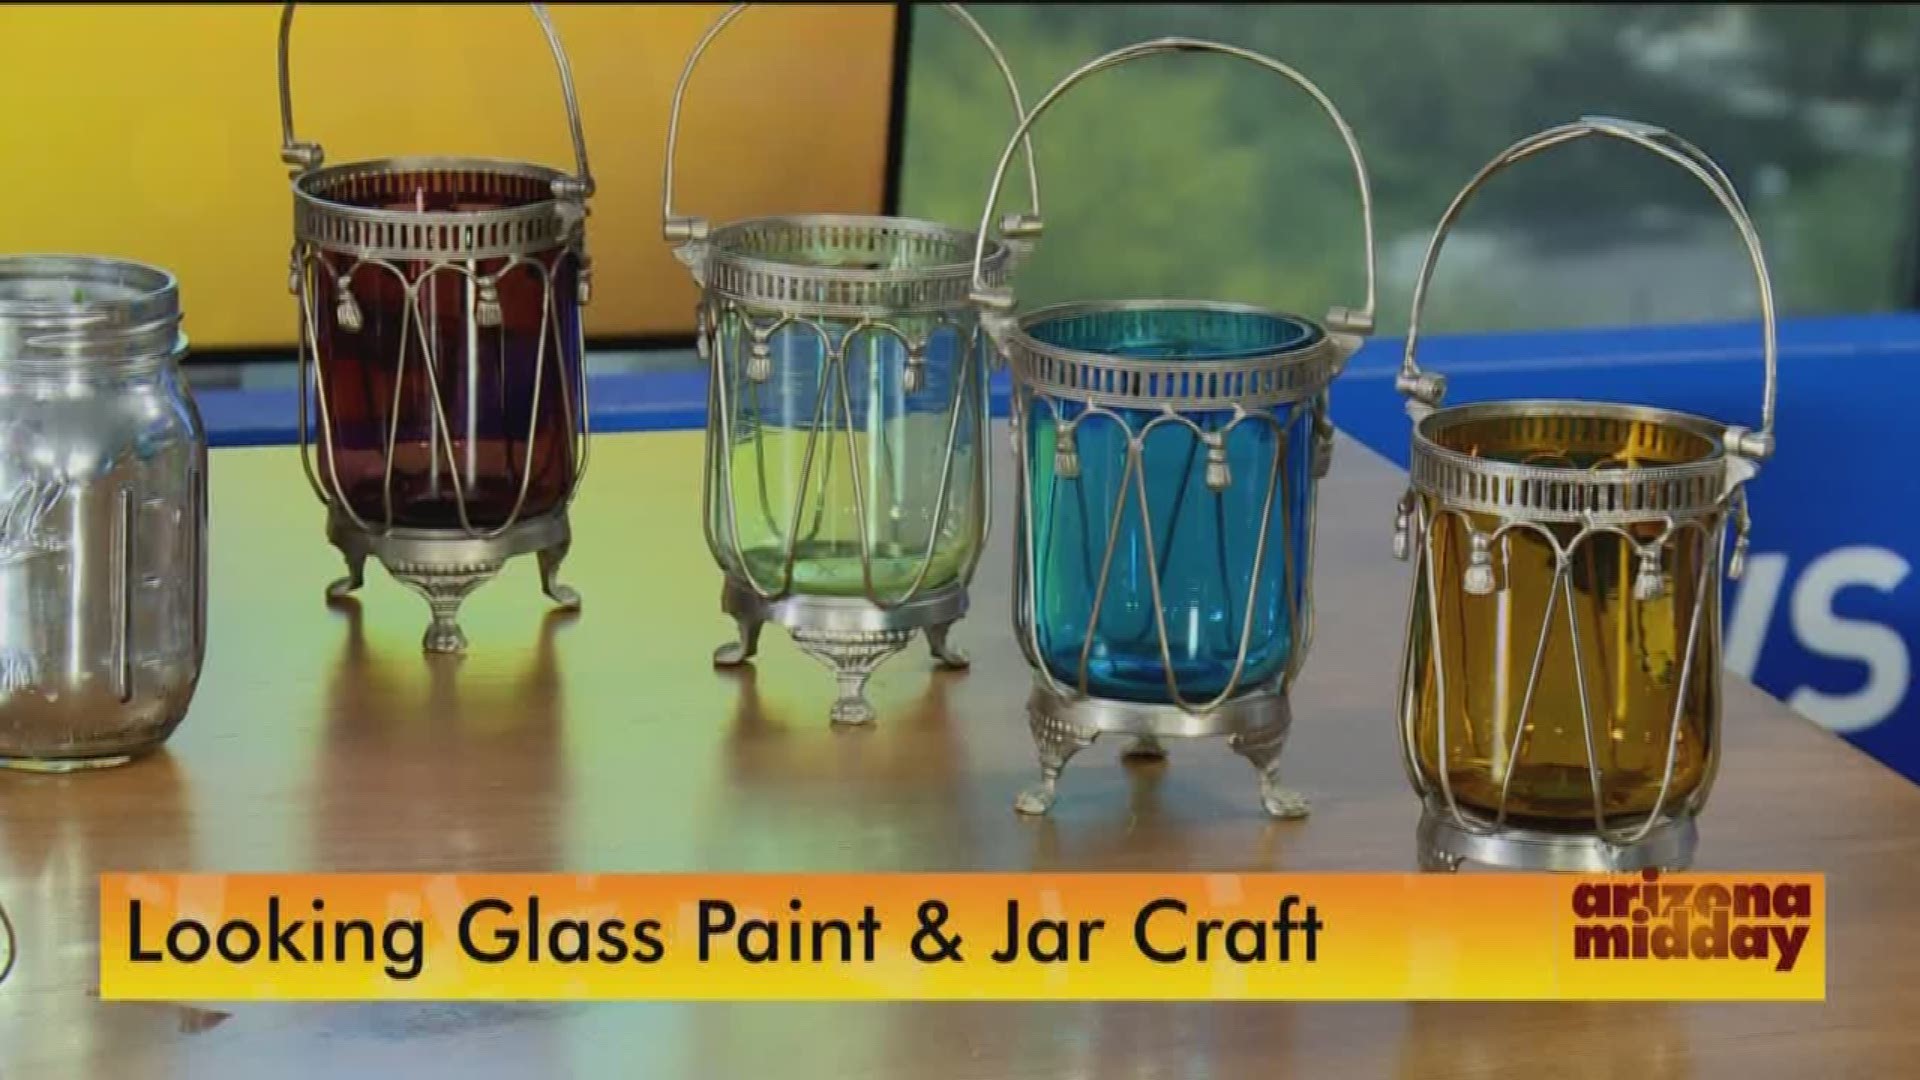 Jan shows us how you can take a regular glass jar to the next level with one simple tool.